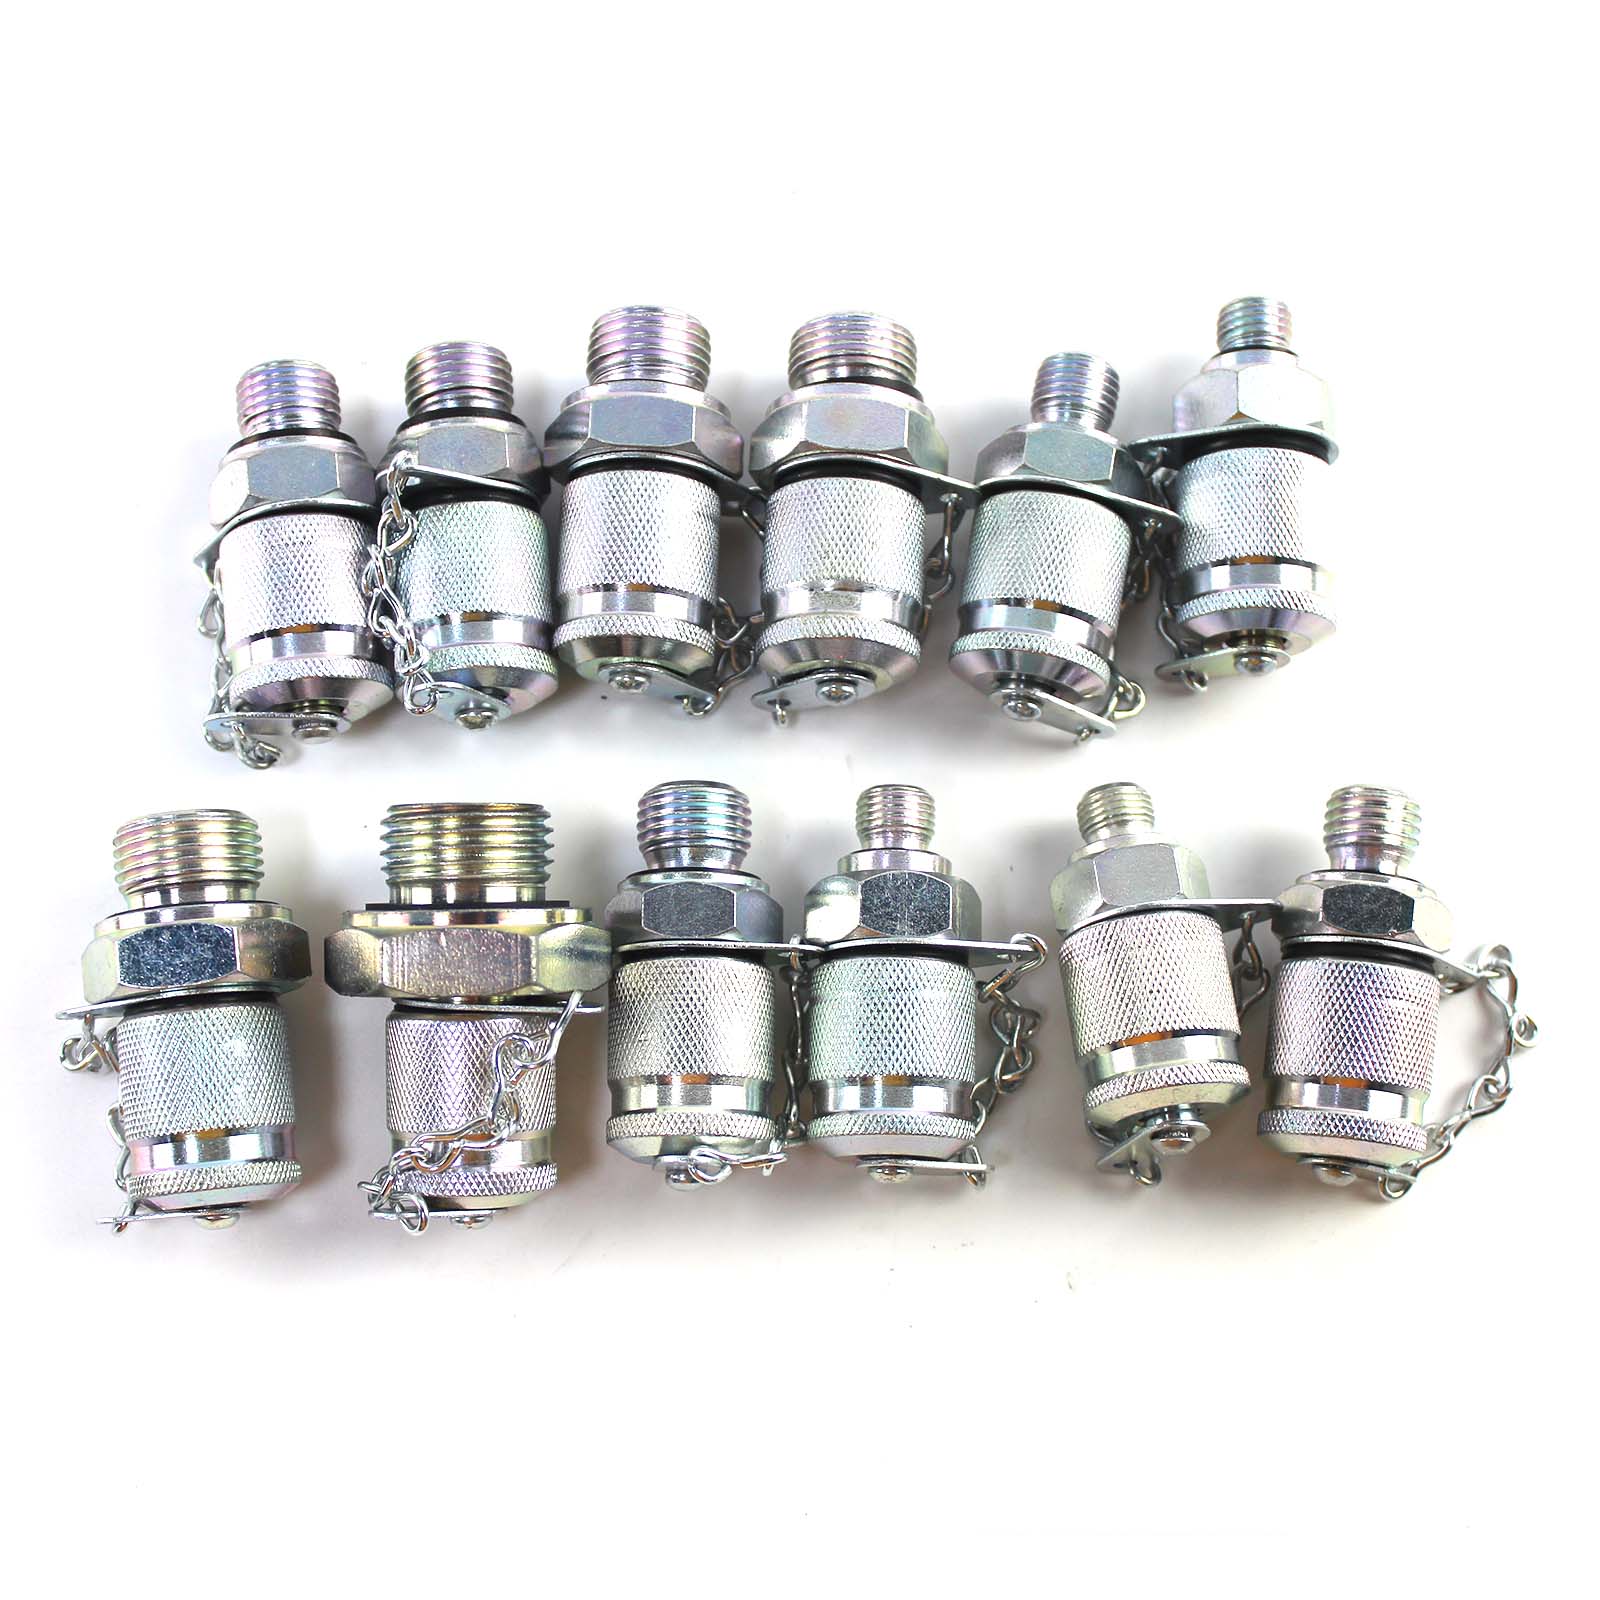 5 Gauges Double Layer Hydraulic Pressure Test Kit 13 Coupling 14 Tee Fittings Free Shipping